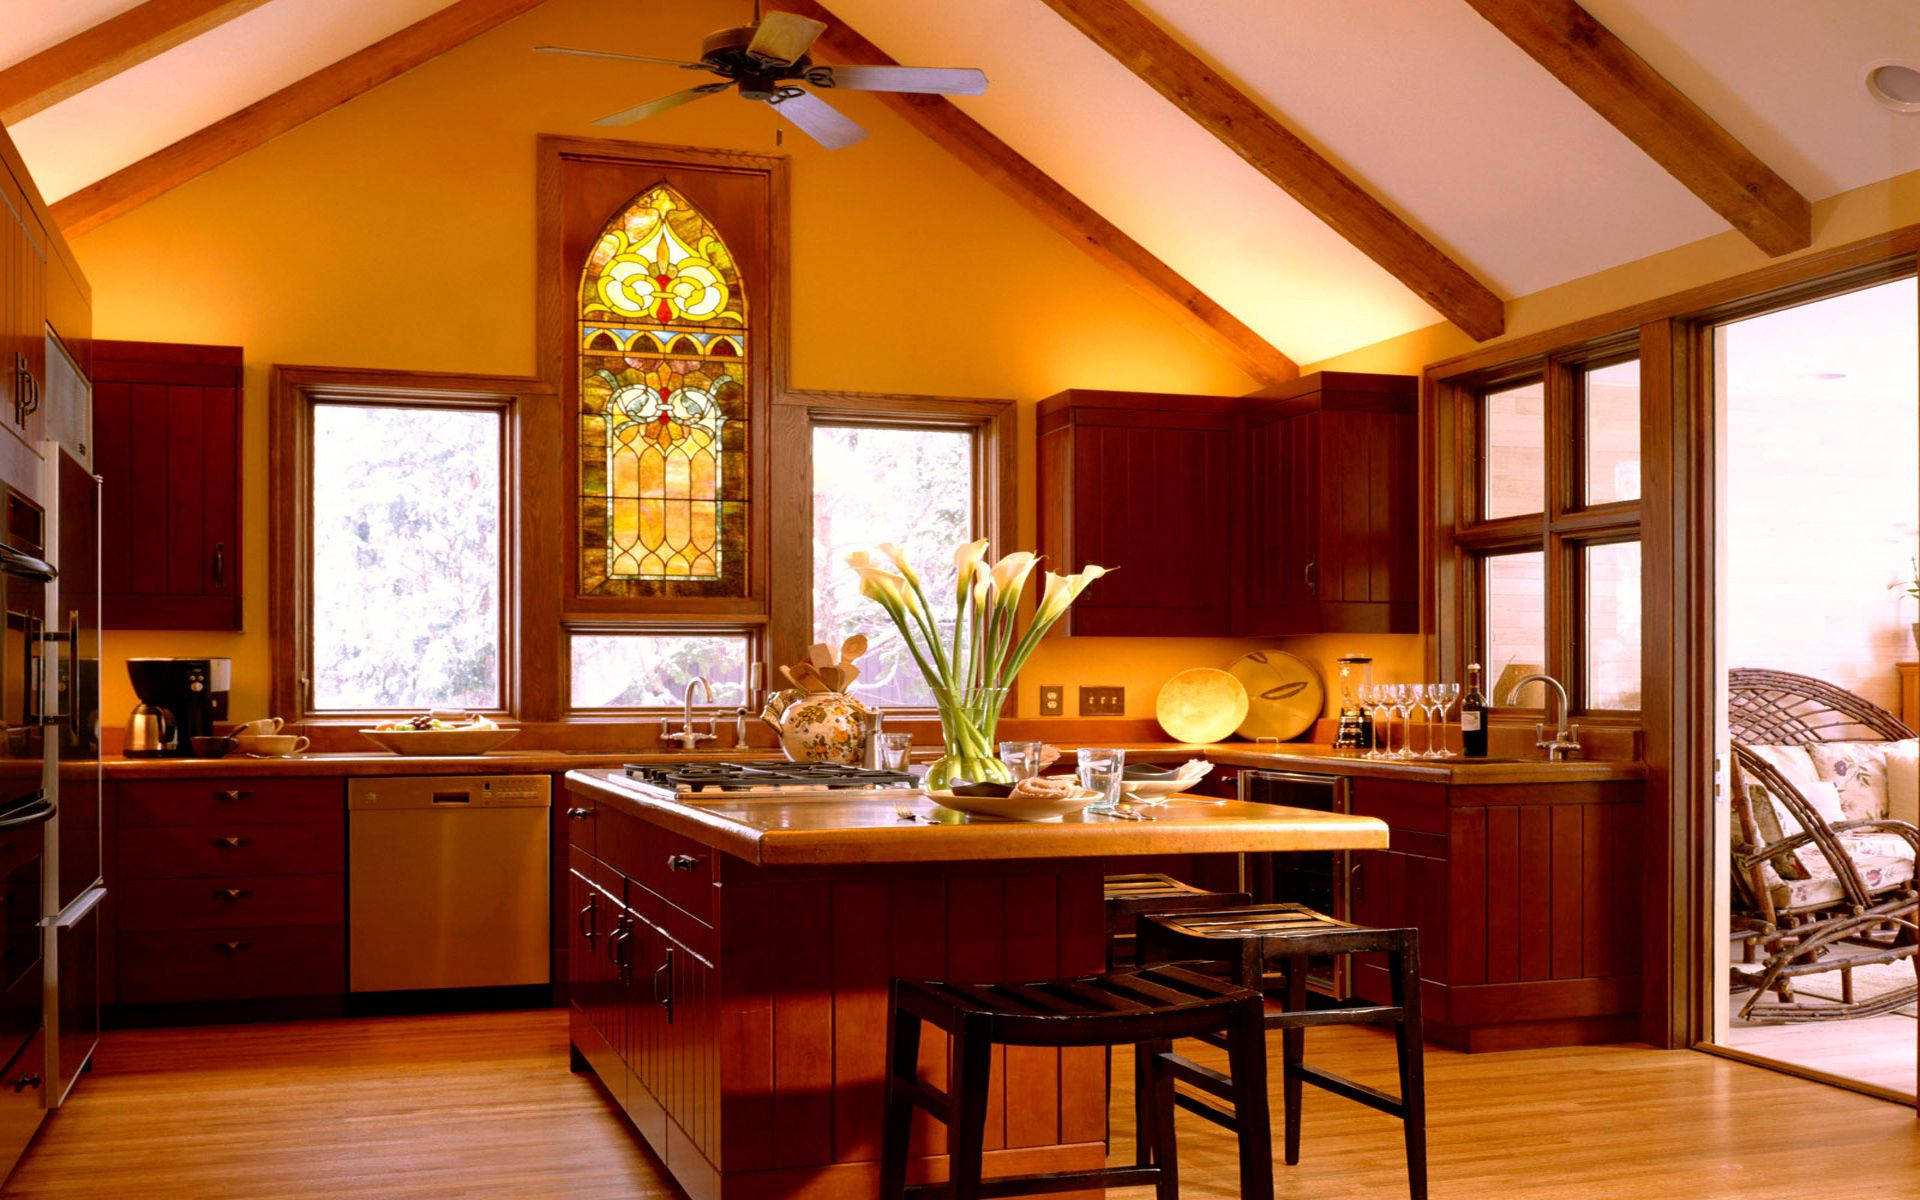 Kitchen Background With Stained Glass Window Wallpaper